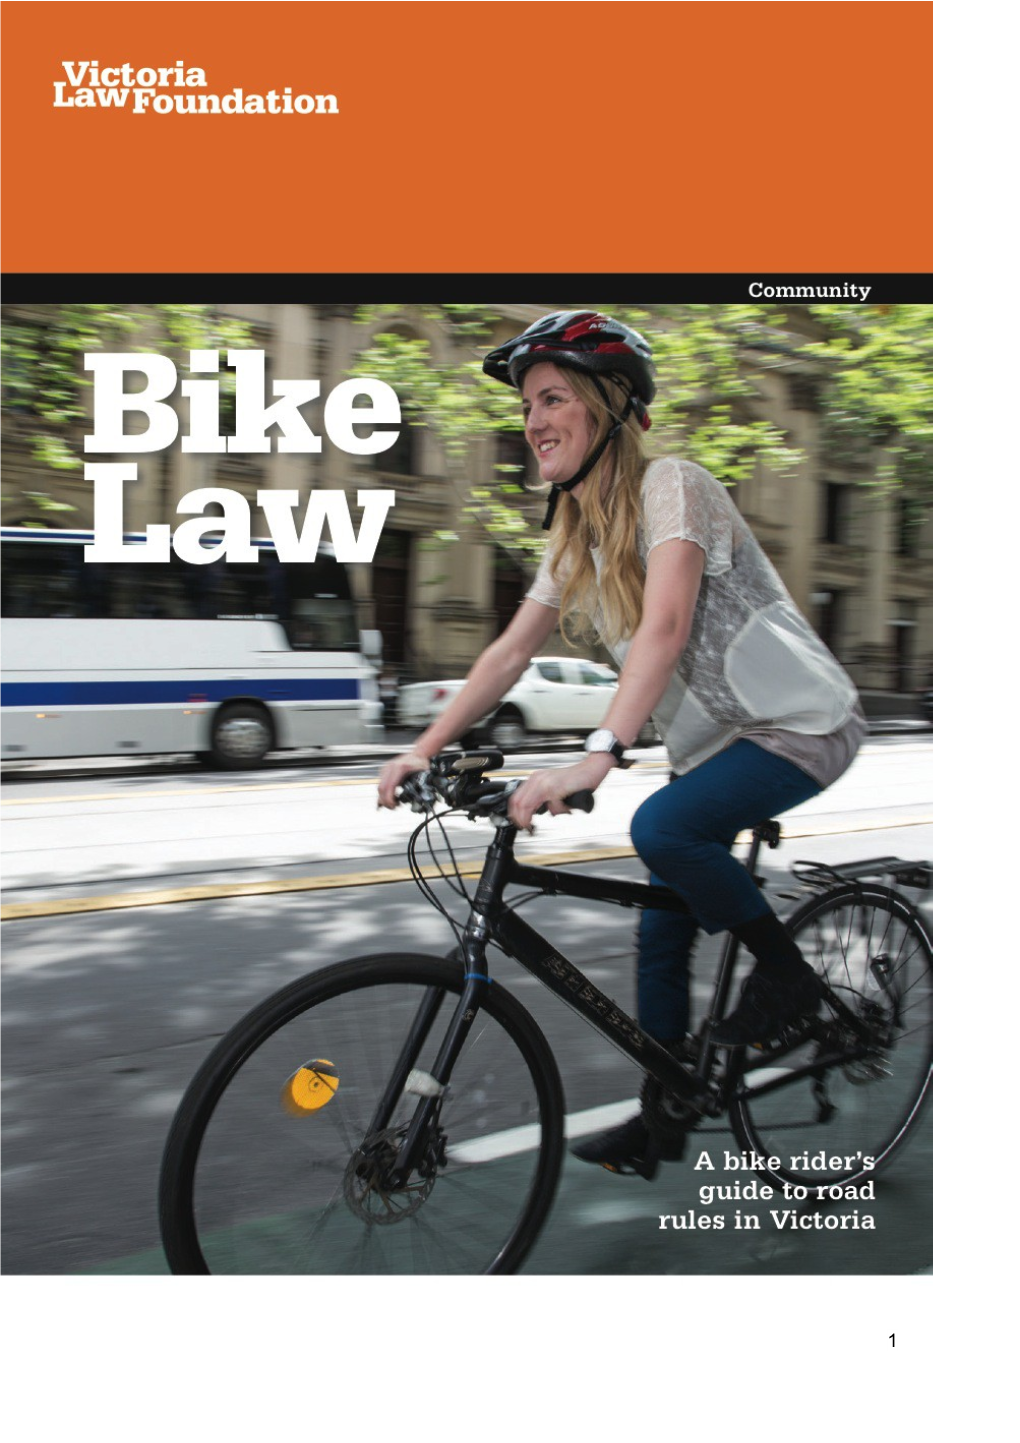 A Bike Rider S Guide to Road Rules in Victoria